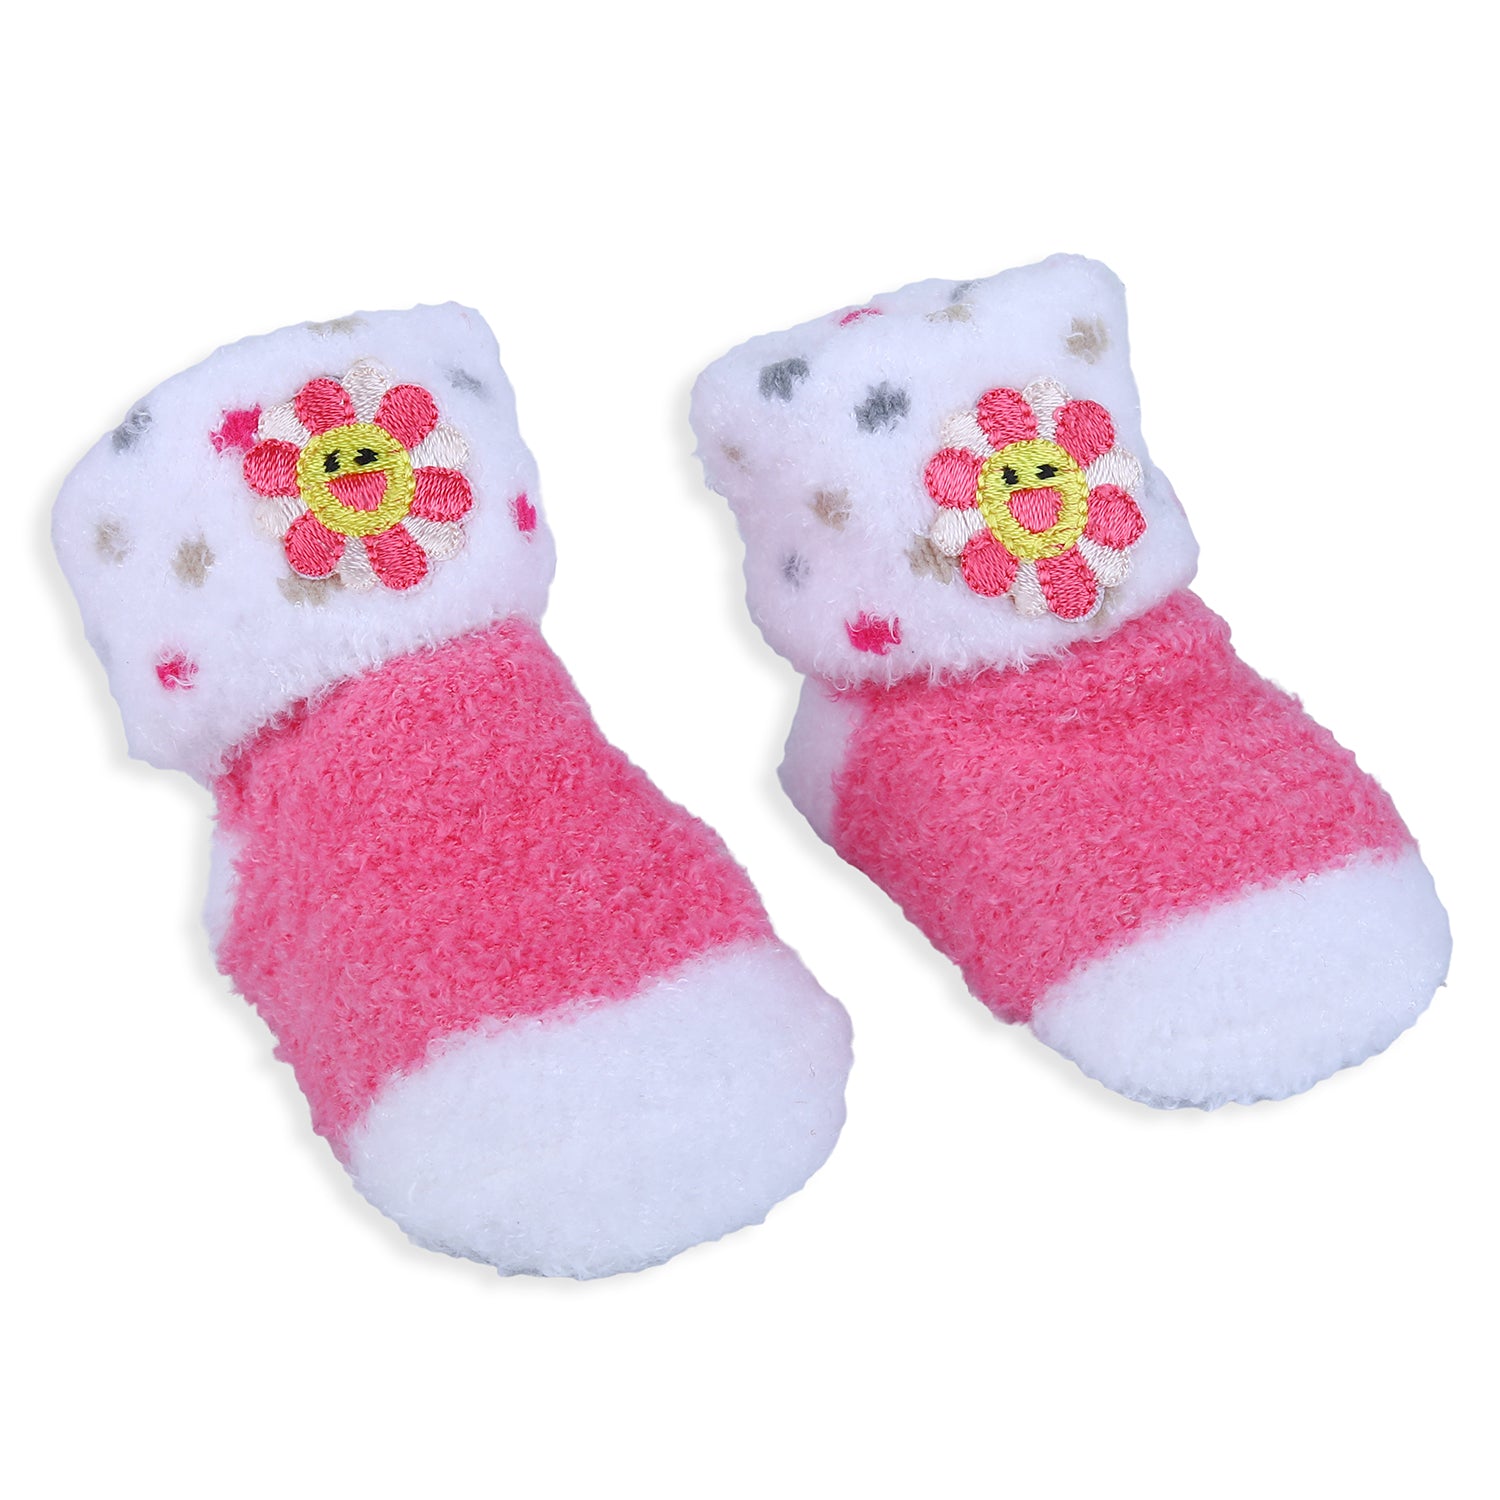 Baby Moo Floral Stripes Newborn Breathable Infant Cotton Socks - Pink